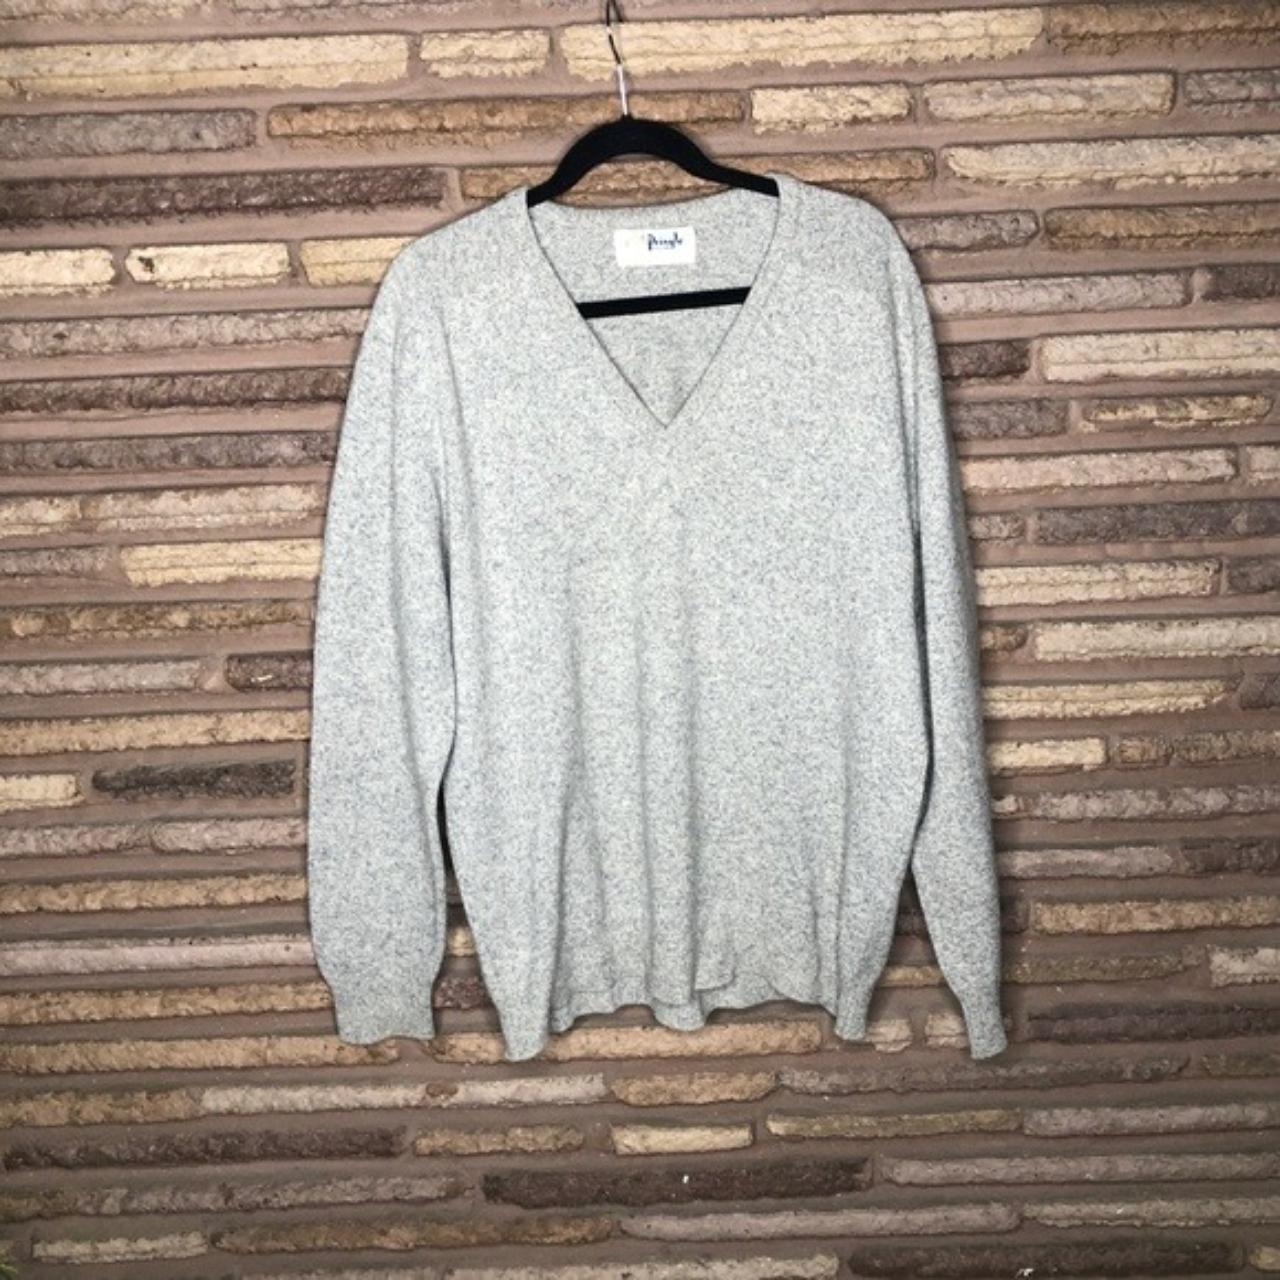 Product Image 1 - Men’s traditional heather gray V